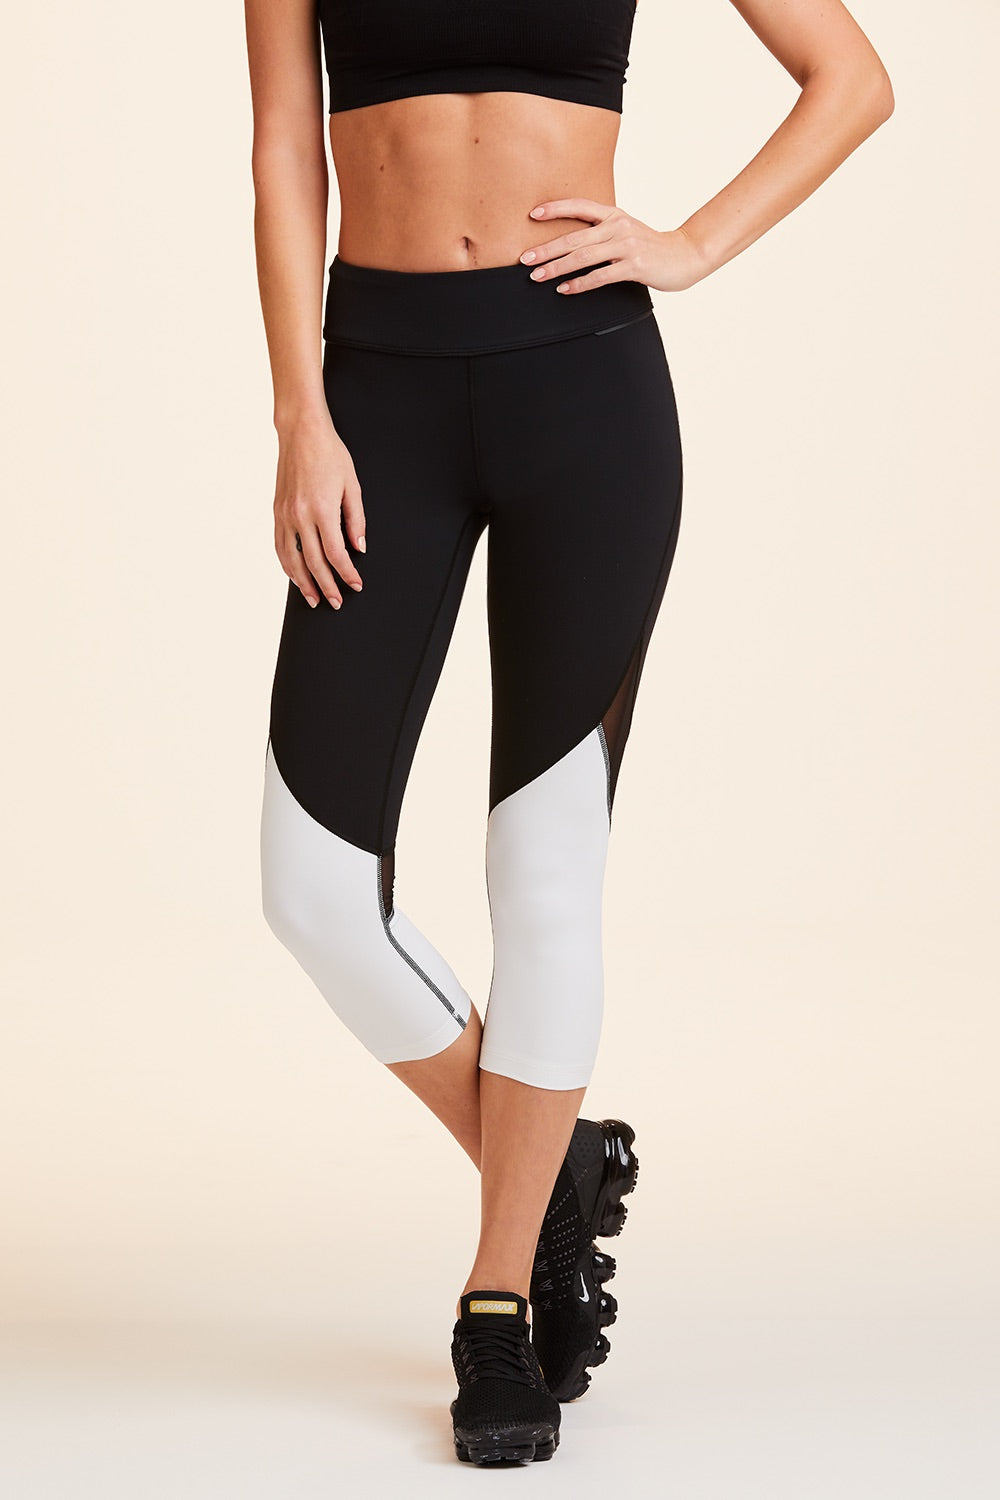 Front view of Alala Women's Luxury Athleisure cropped black and white tight with mesh paneling on back of knees.